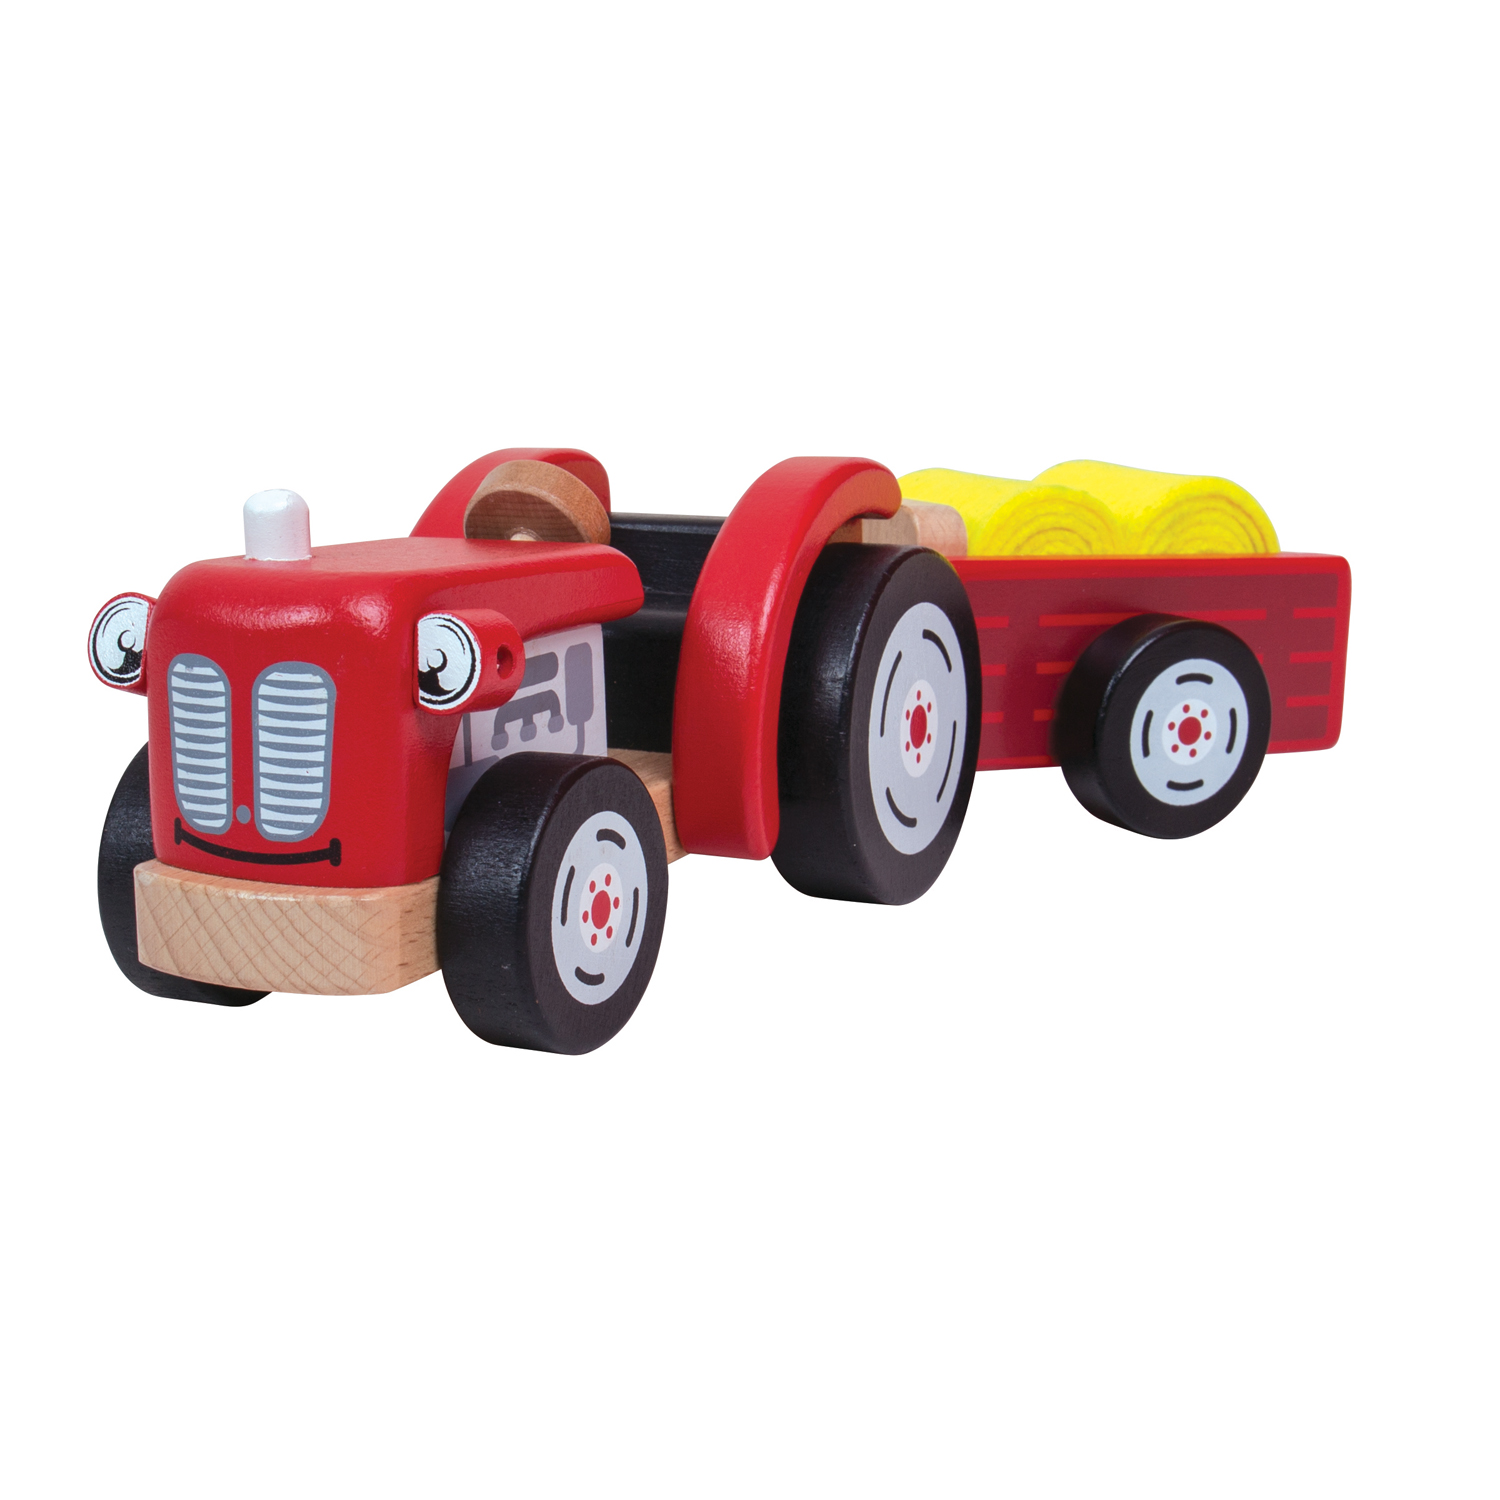 Bigjigs Toys Tractor and Trailer Playset